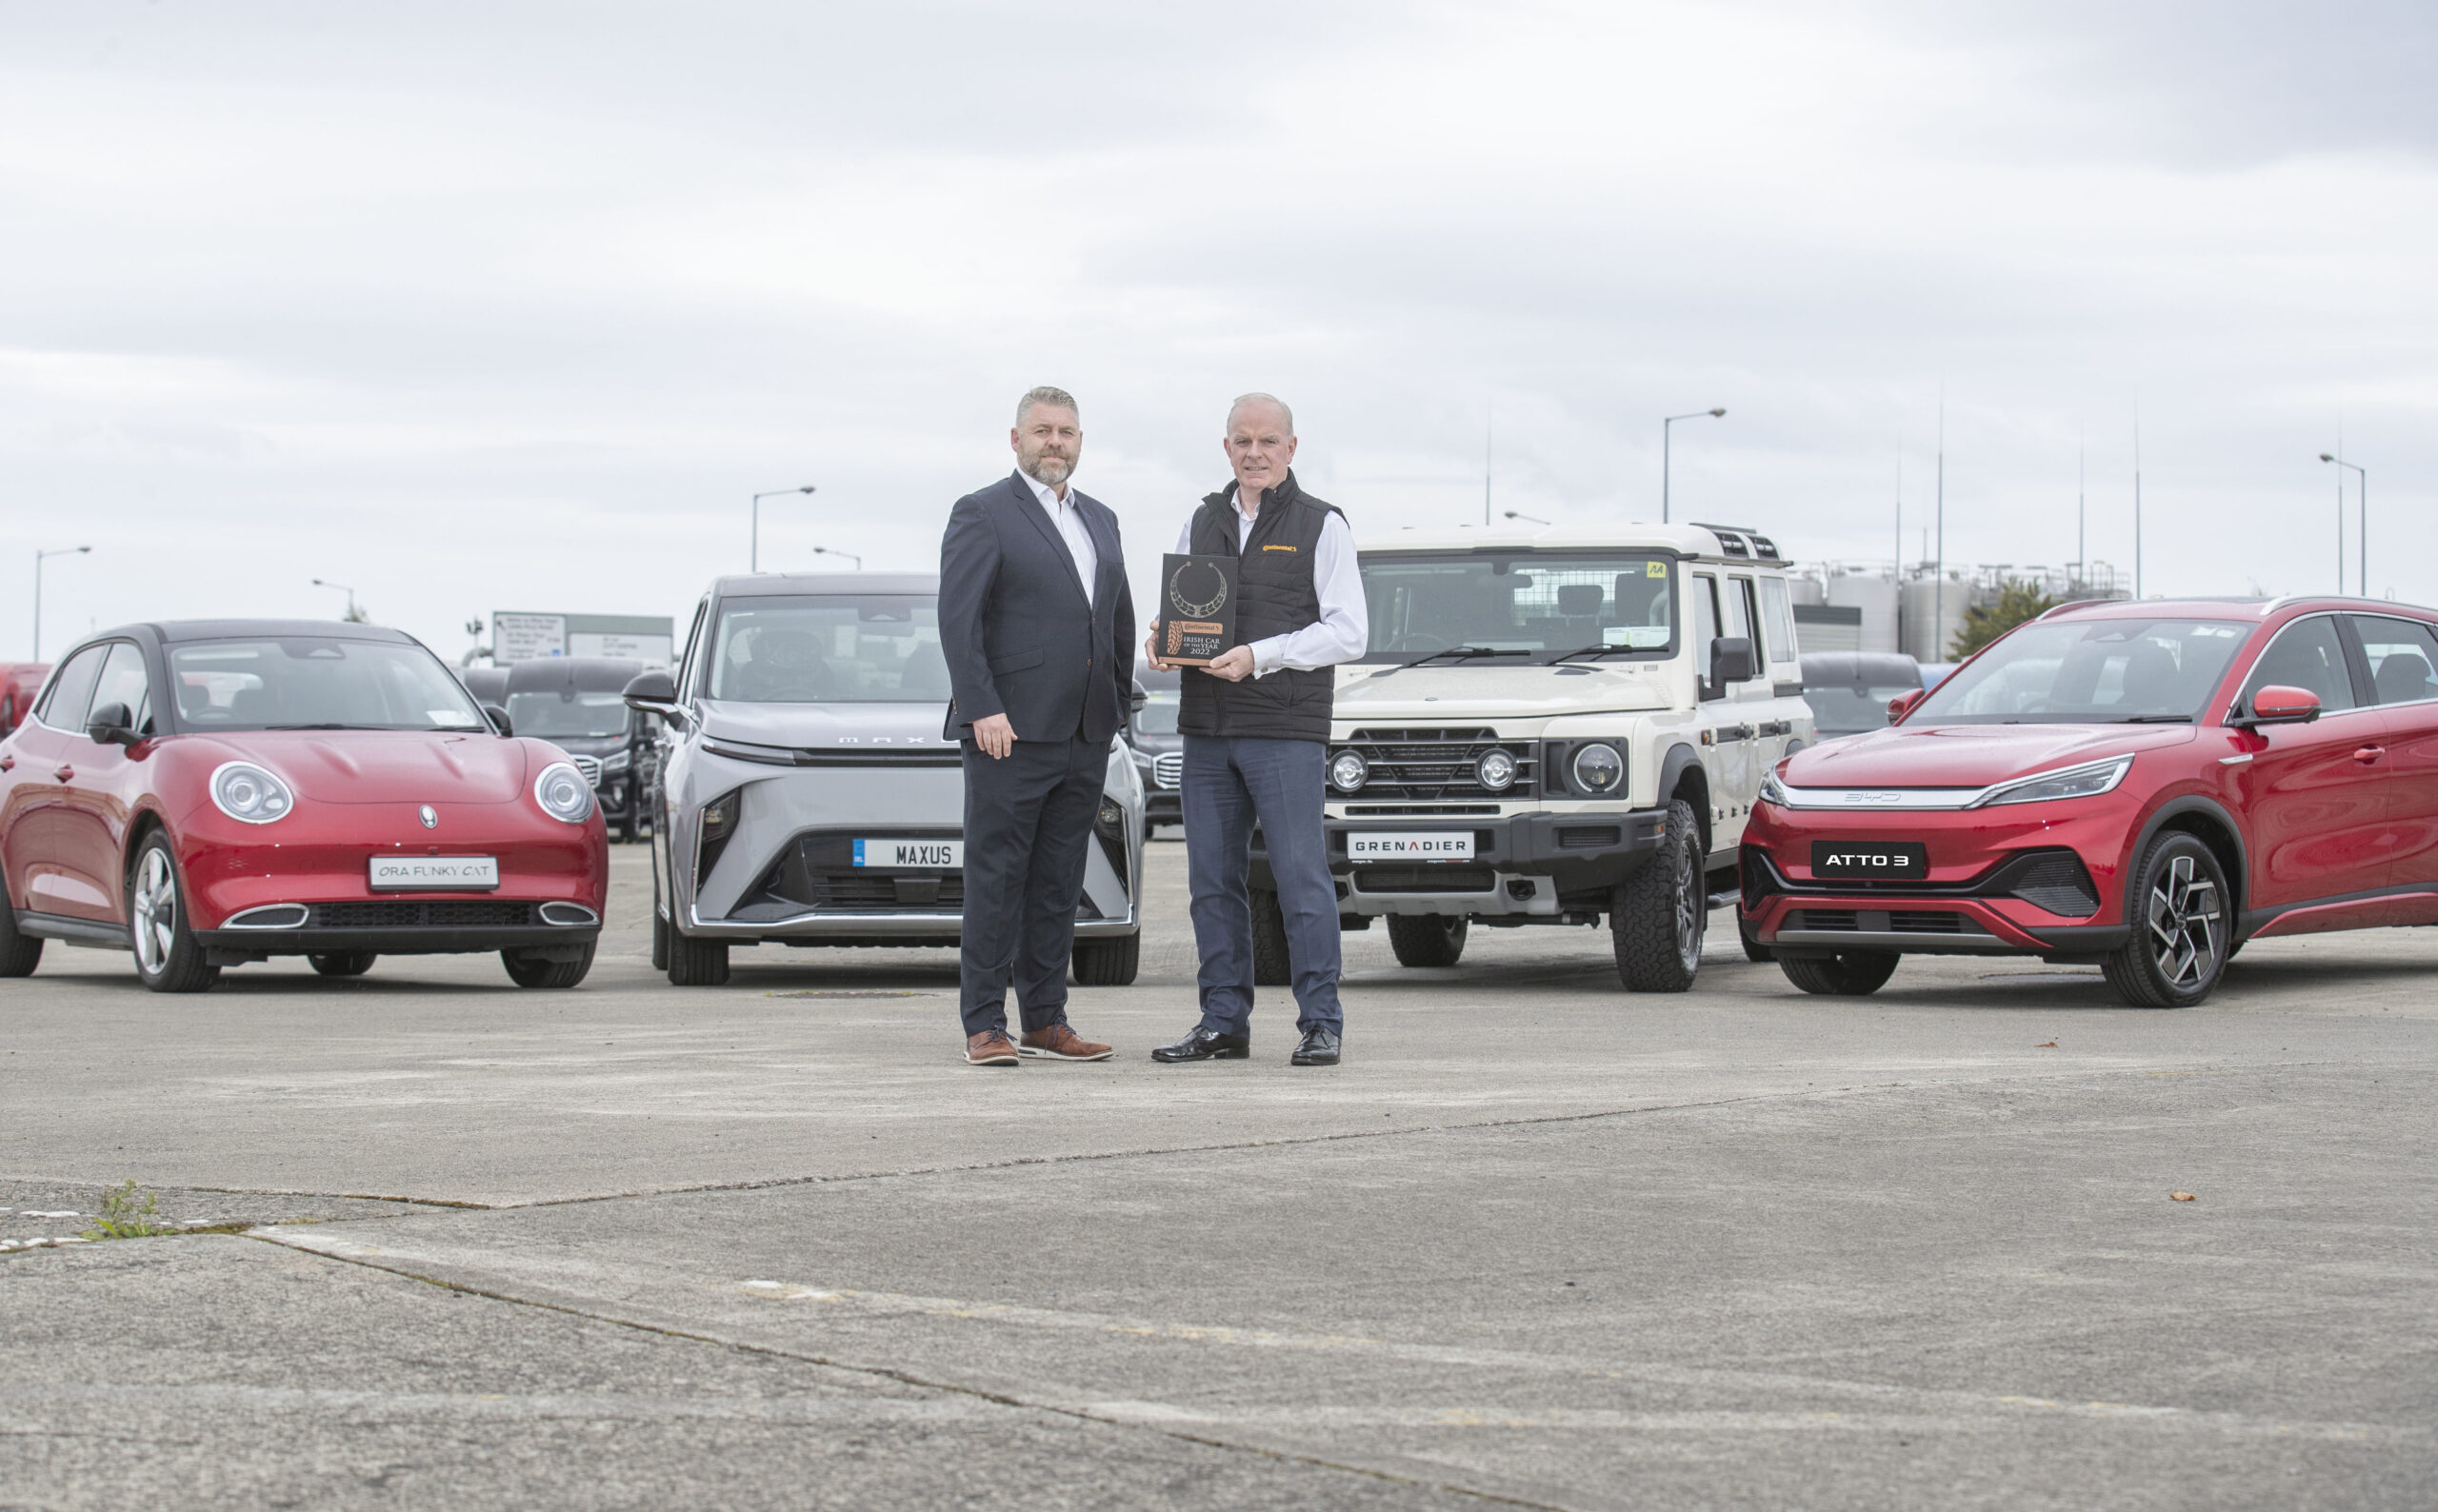 MMAI Chairman, Joe Rayfus, and Tom Dennigan of awards sponsor, Continental Tyres, with four of the new brand models competing for an award for the first time in this year’s programme: Ora Funky Cat, Maxus Mifa 9, INEOS Grenadier and BYD Atto 3.